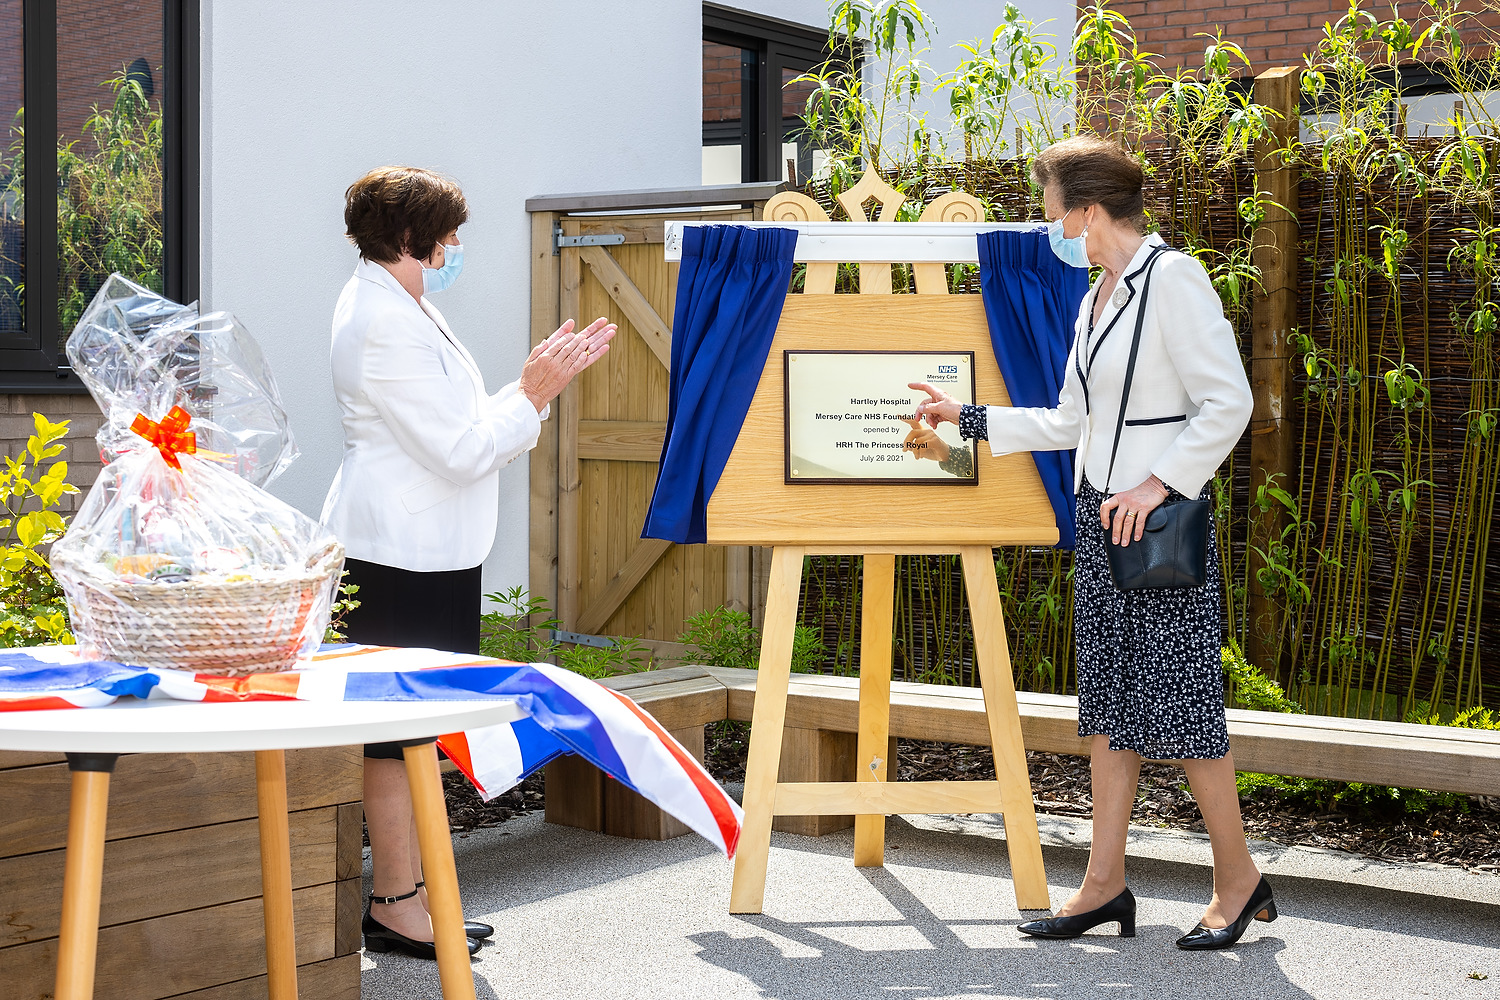 HRH The Princess Royal tours and formally opens the newly built mental health facility at Hartley Hospital, accompanied by Mersey Care NHS Trust Chairman Beatrice Fraenkel and Chief Executive Prof Joe Rafferty CBE as they meet clinicians and service users . Photo credit : Joel Goodman